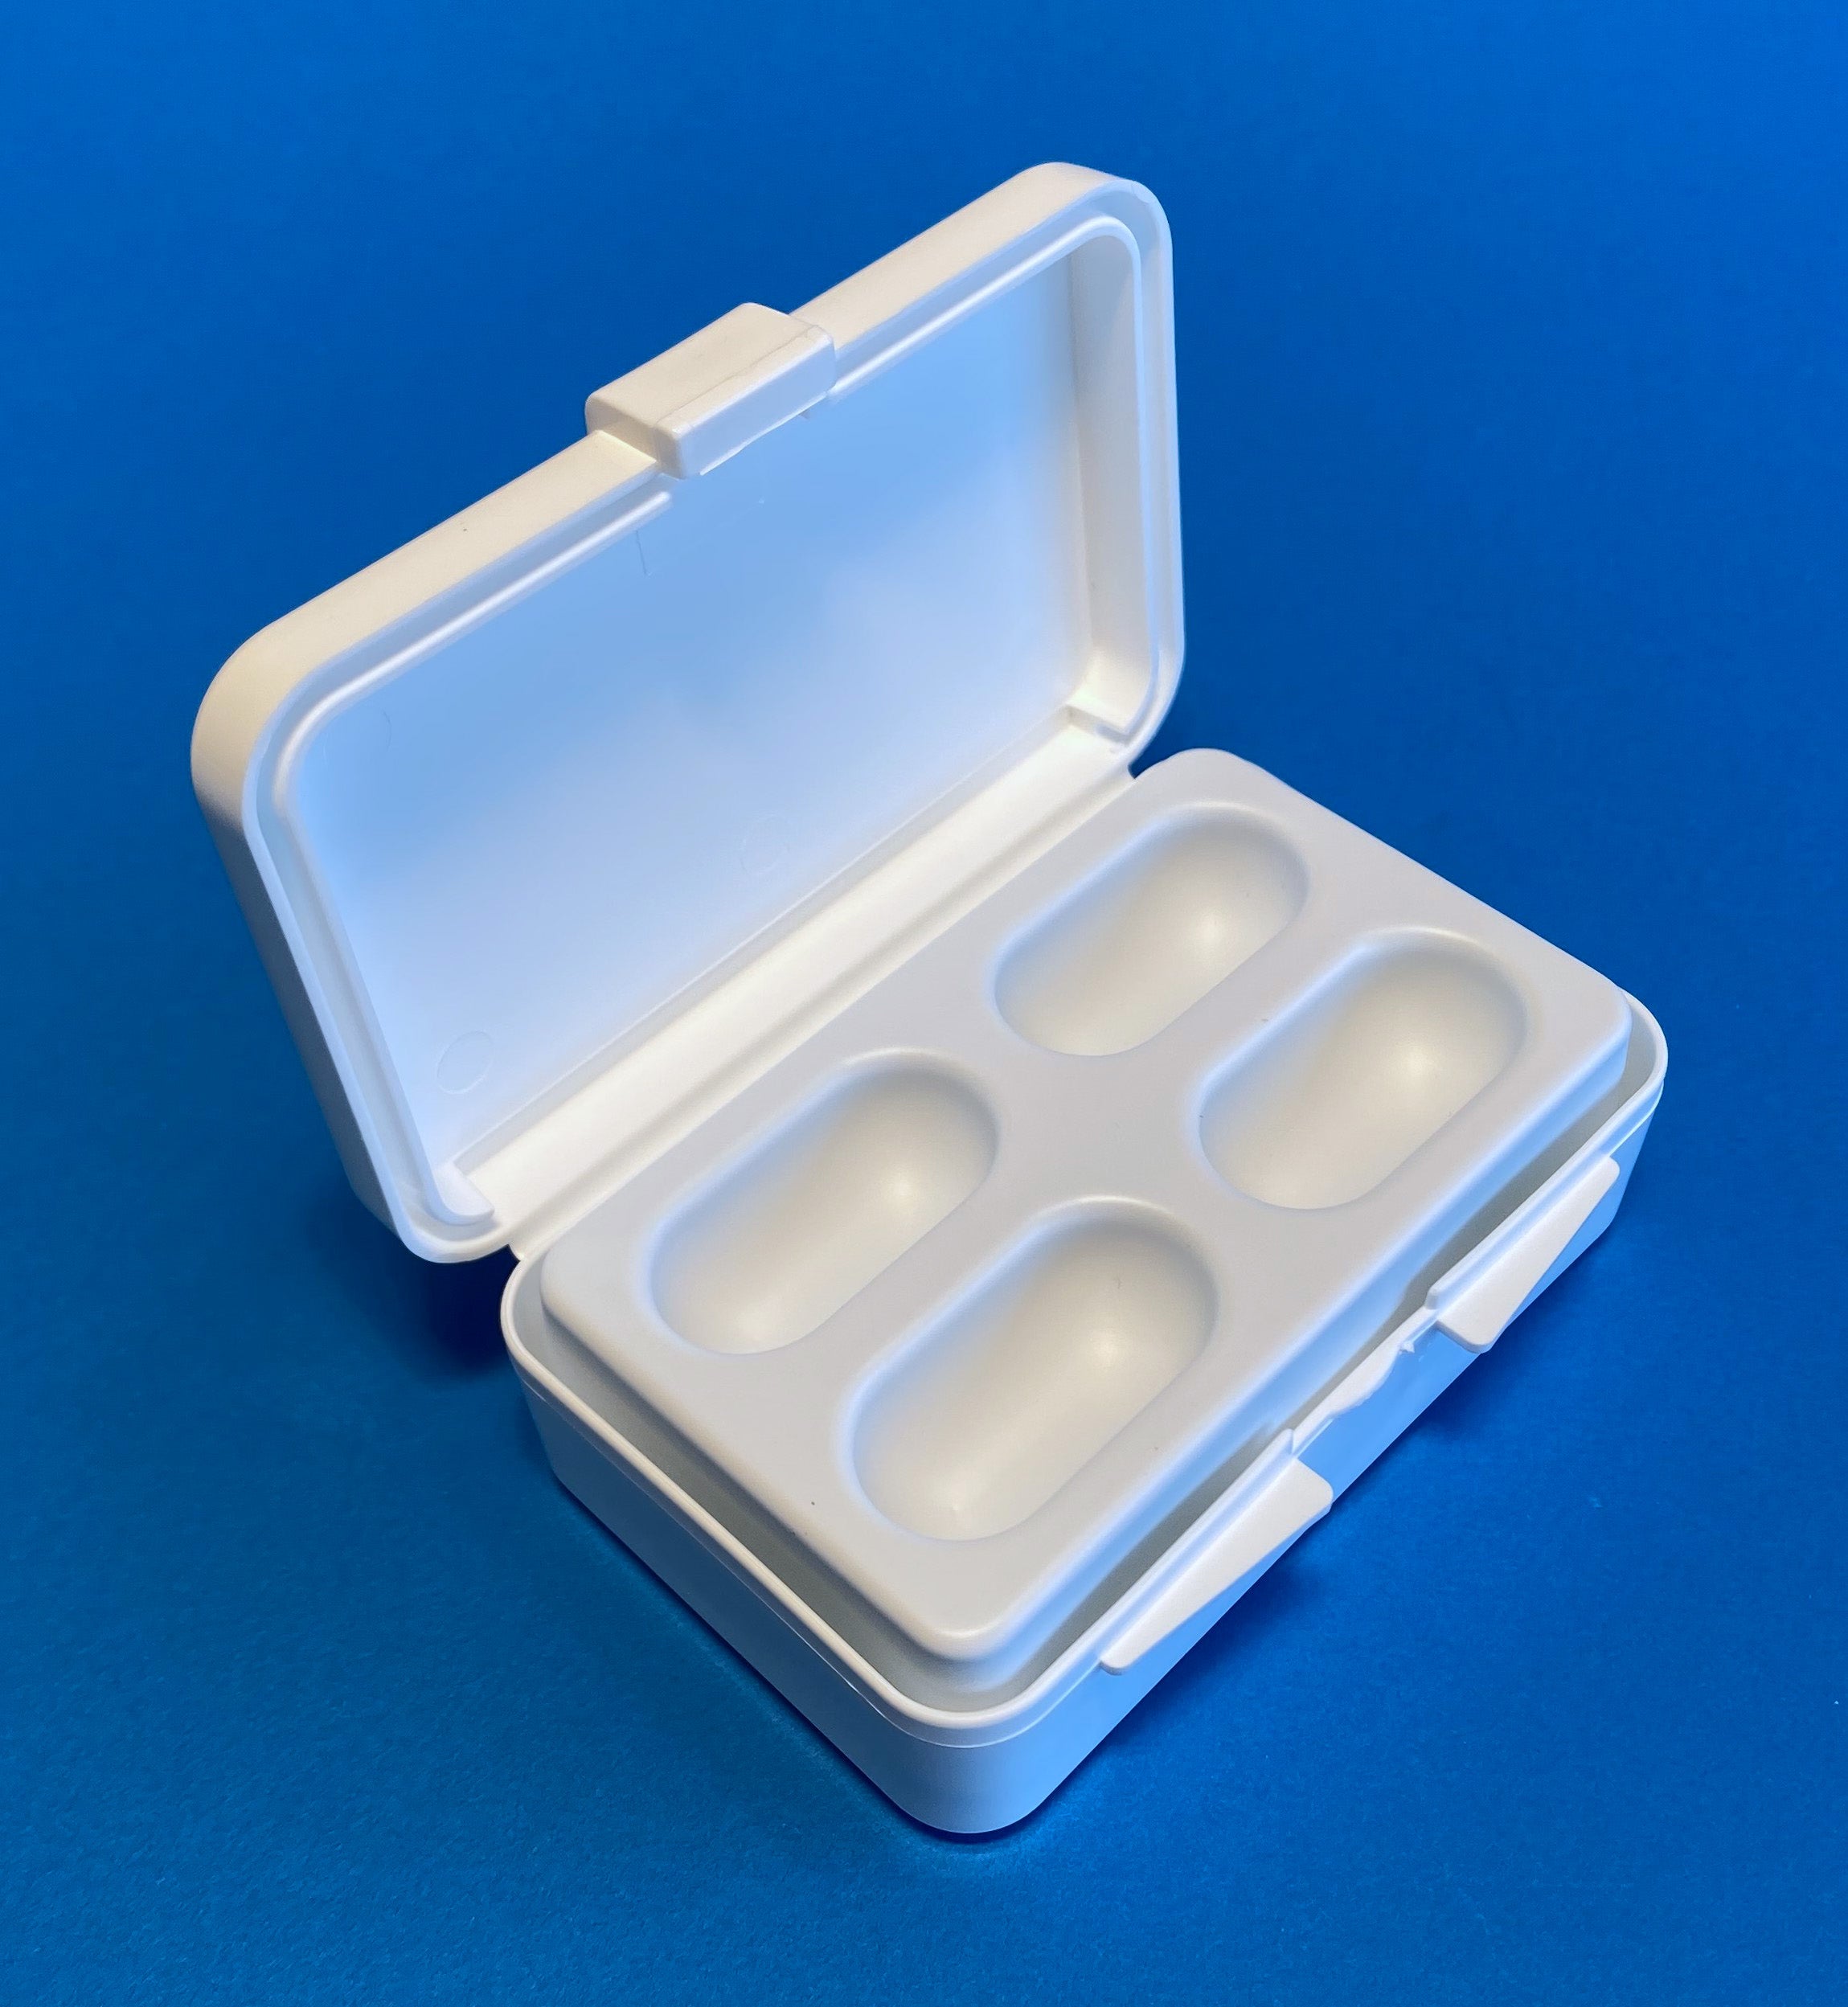 small plastic cases, small plastic cases Suppliers and Manufacturers at